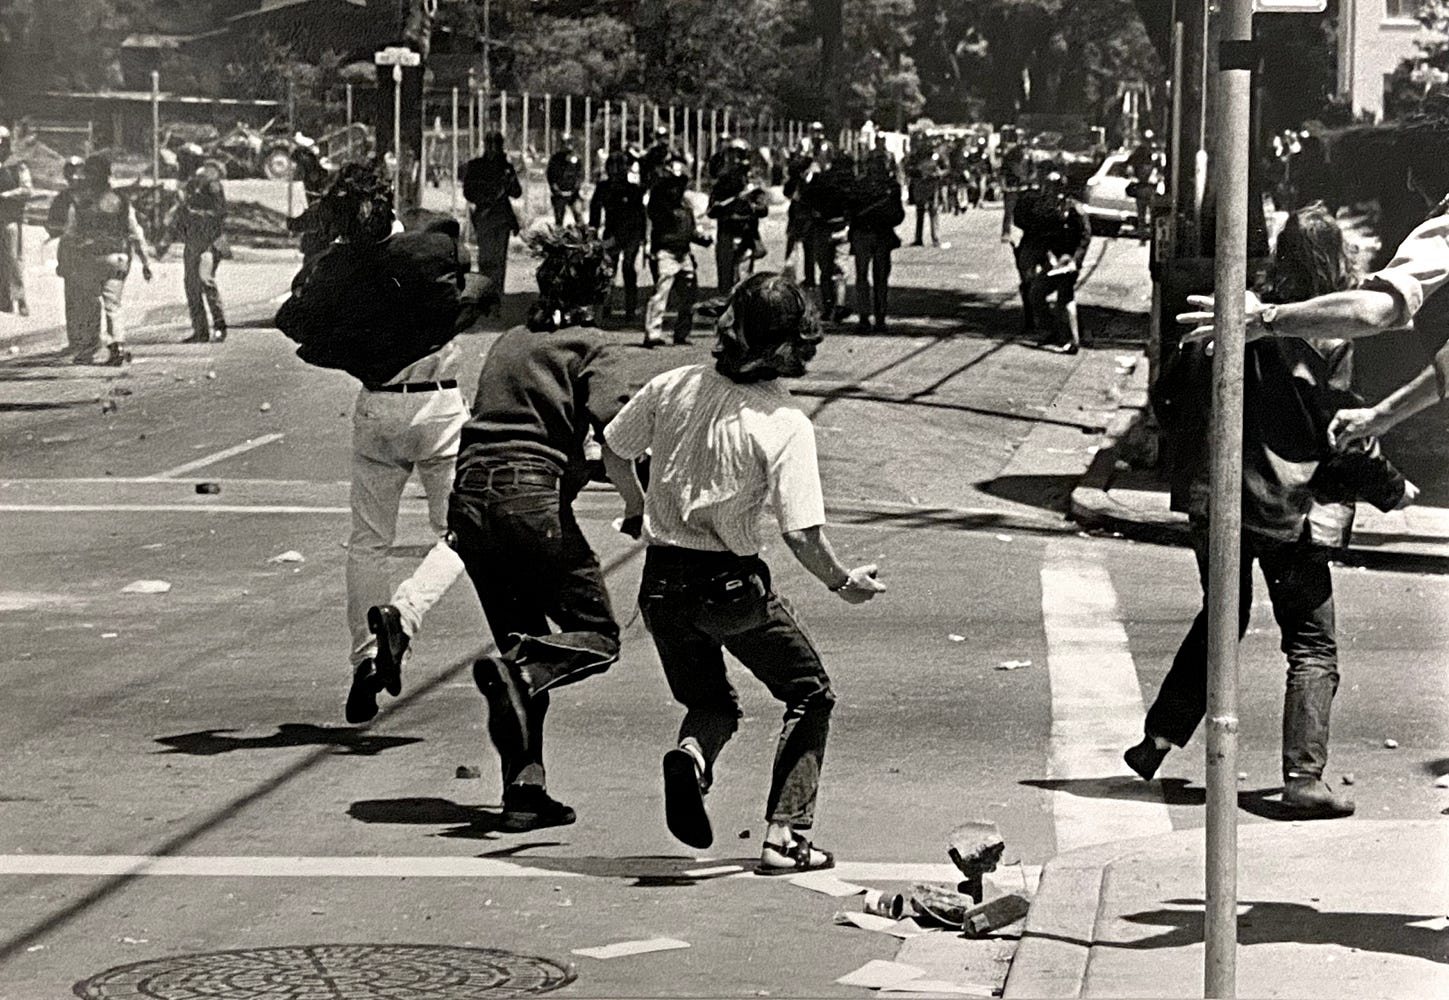 Three protestors on the street level throw objects at an advancing line of police.